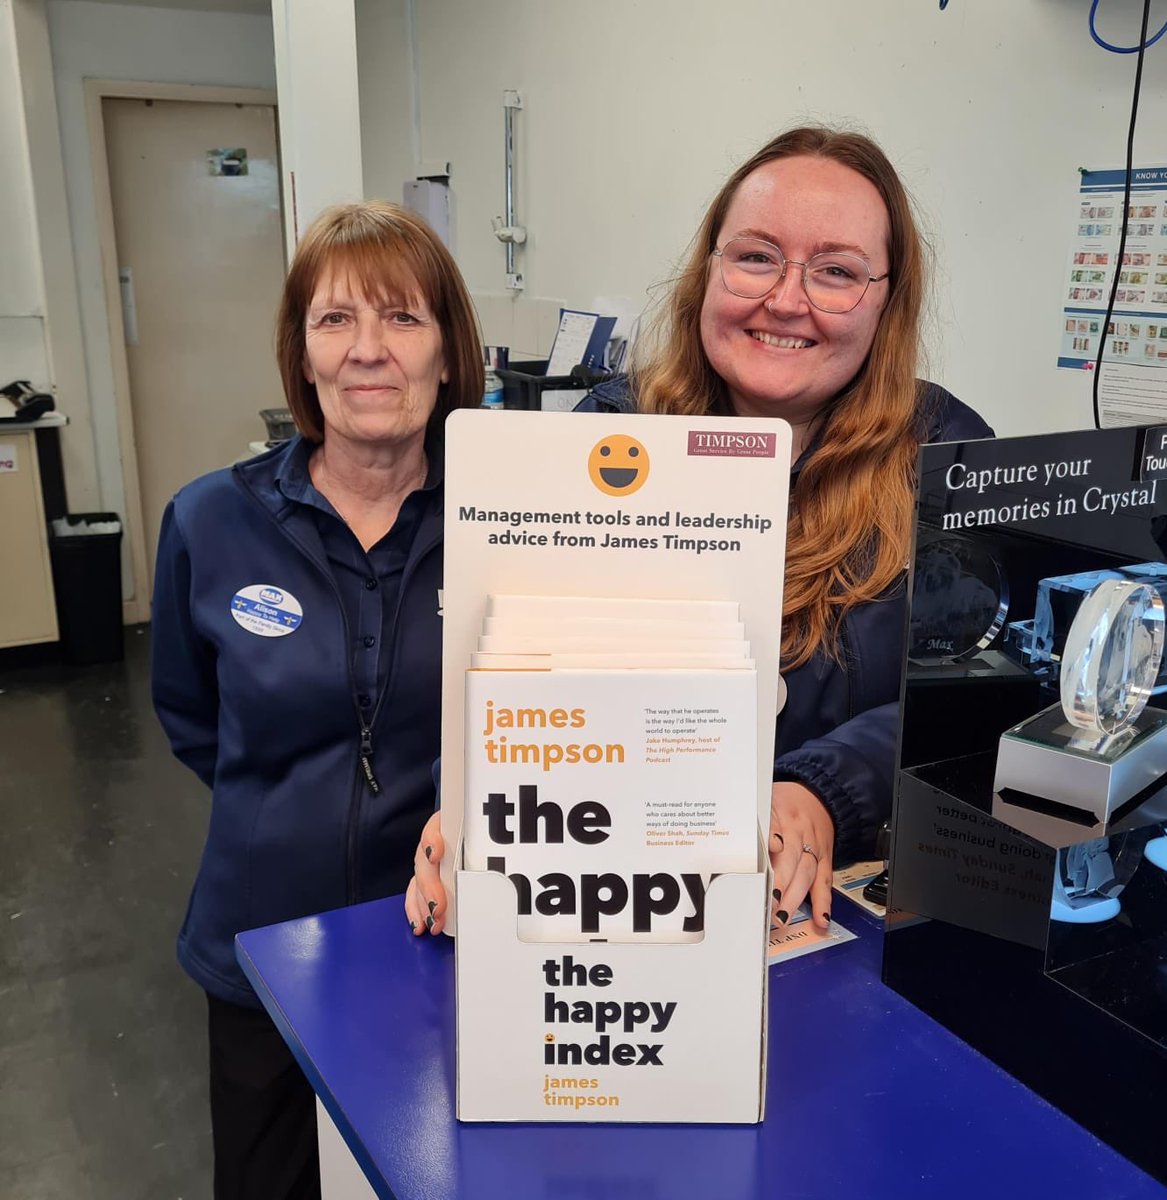 Smiles all round from Sunderland Max Spielmann shop. Ali and Elisha with their Happy Index books 📚 for sale…all proceeds go to the Prison Reform Trust.